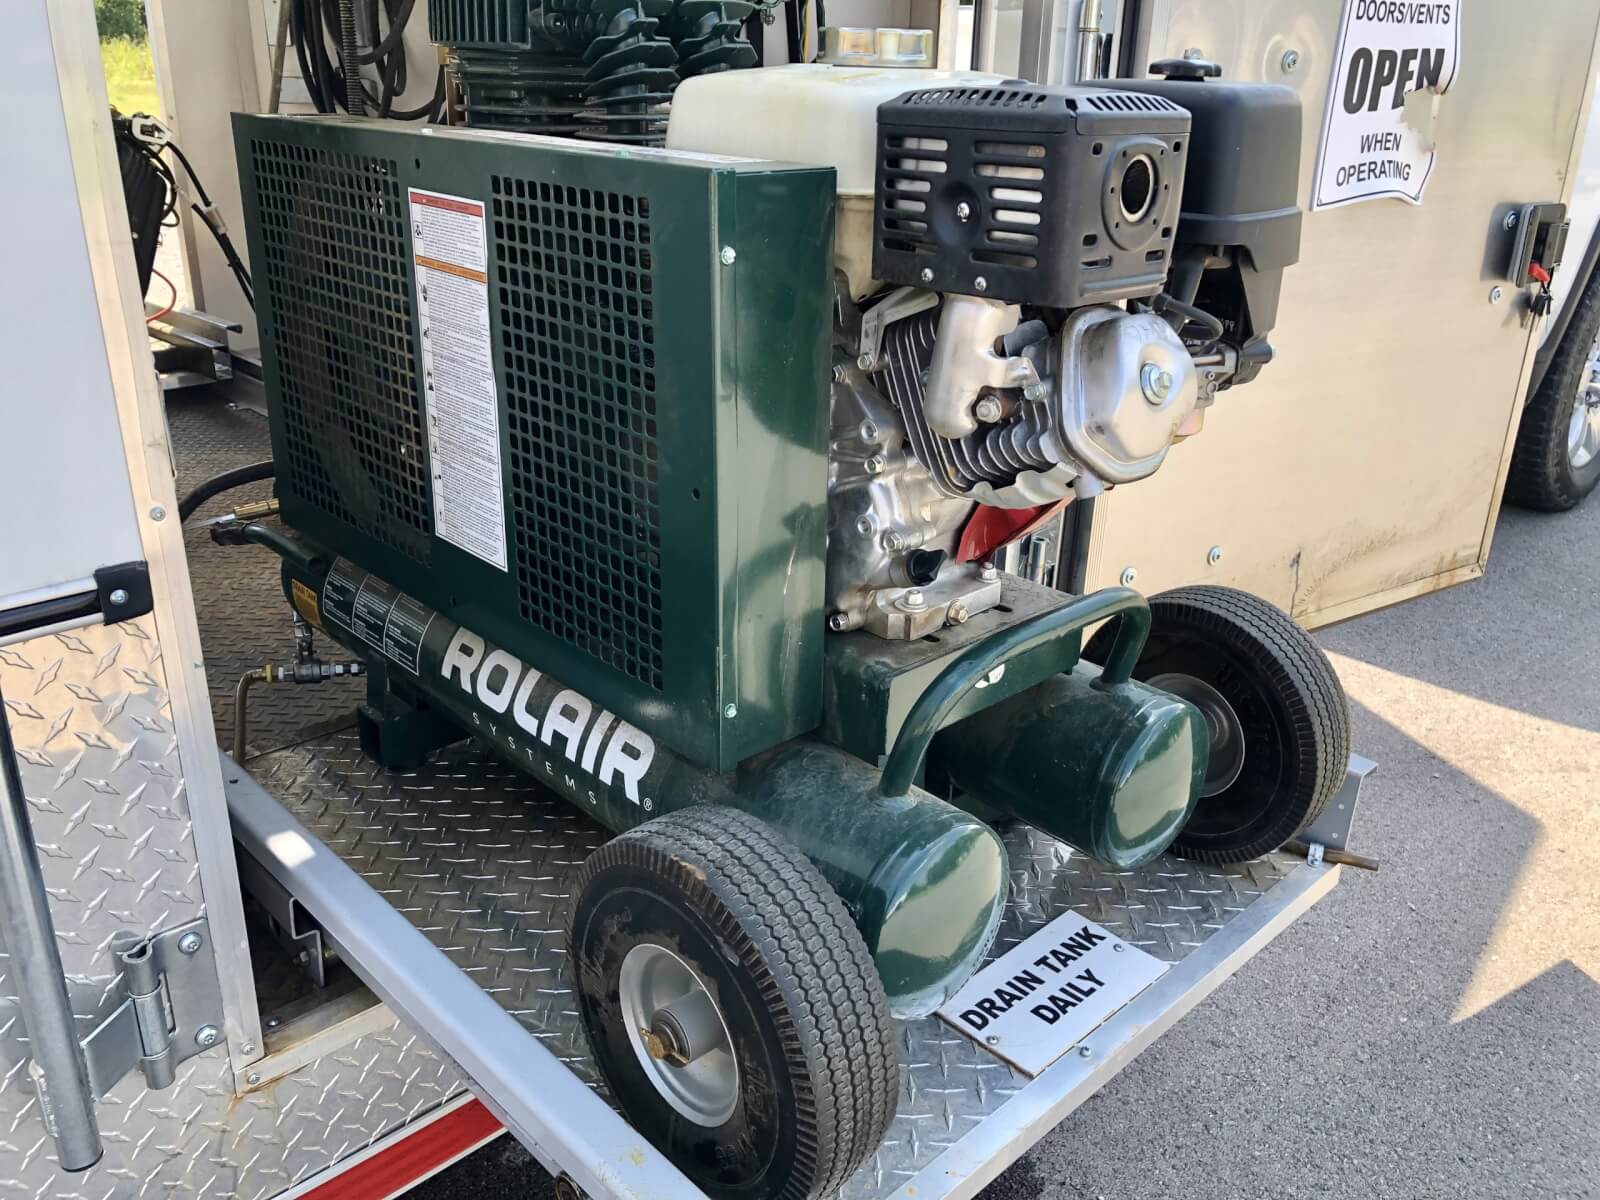 Used Rolair Systems engine inside trailer